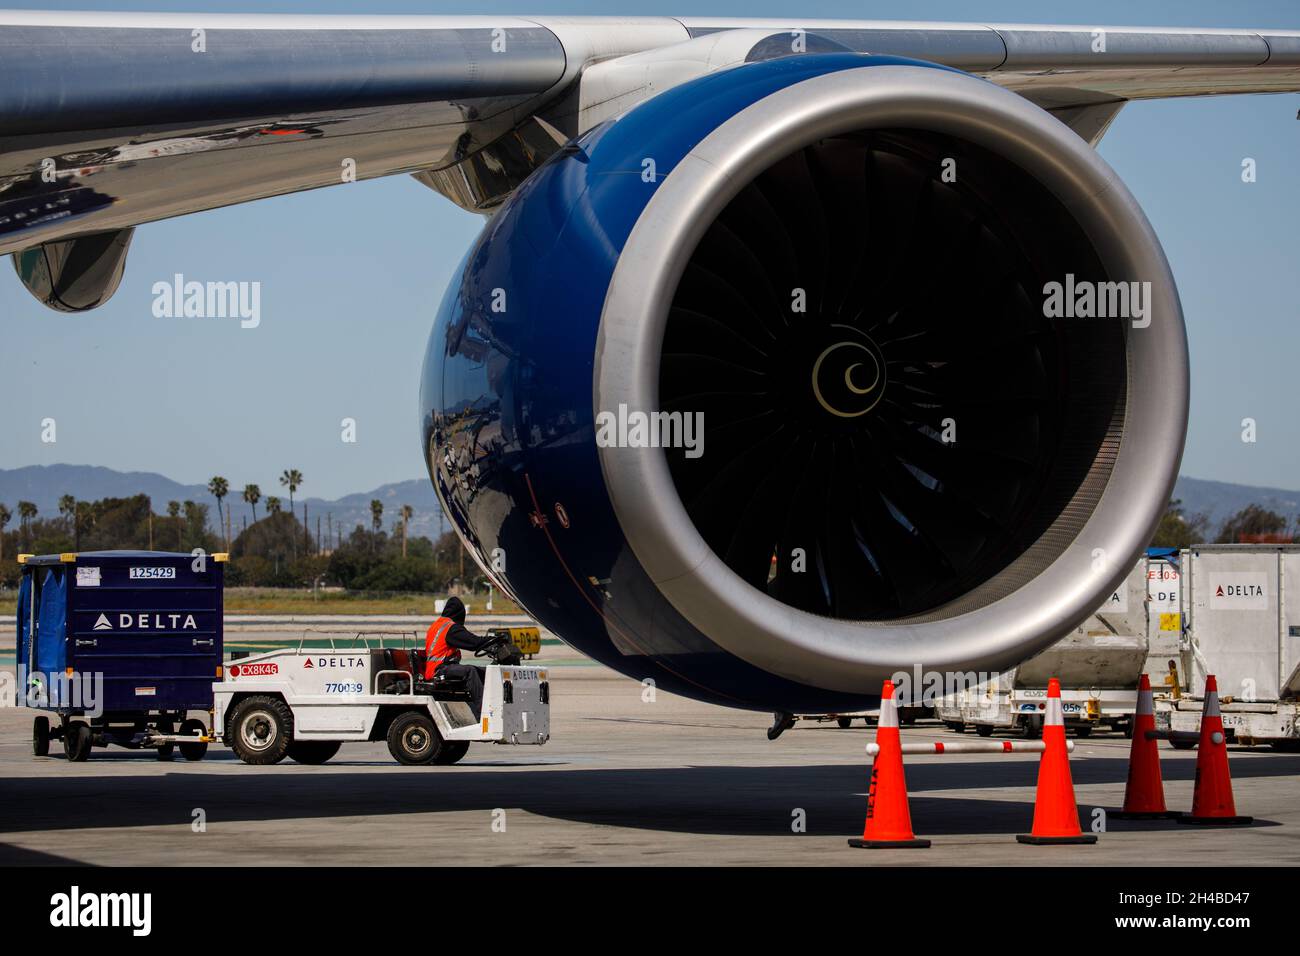 https://c8.alamy.com/comp/2H4BD47/los-angeles-california-usa-29th-mar-2019-the-engine-of-a-delta-air-lines-inc-airbus-se-a350-900-registration-n504dn-on-the-tarmac-at-los-angeles-international-airport-lax-on-friday-march-29-2019-in-los-angeles-calif-2019-patrick-t-fallon-credit-image-patrick-fallonzuma-press-wire-2H4BD47.jpg